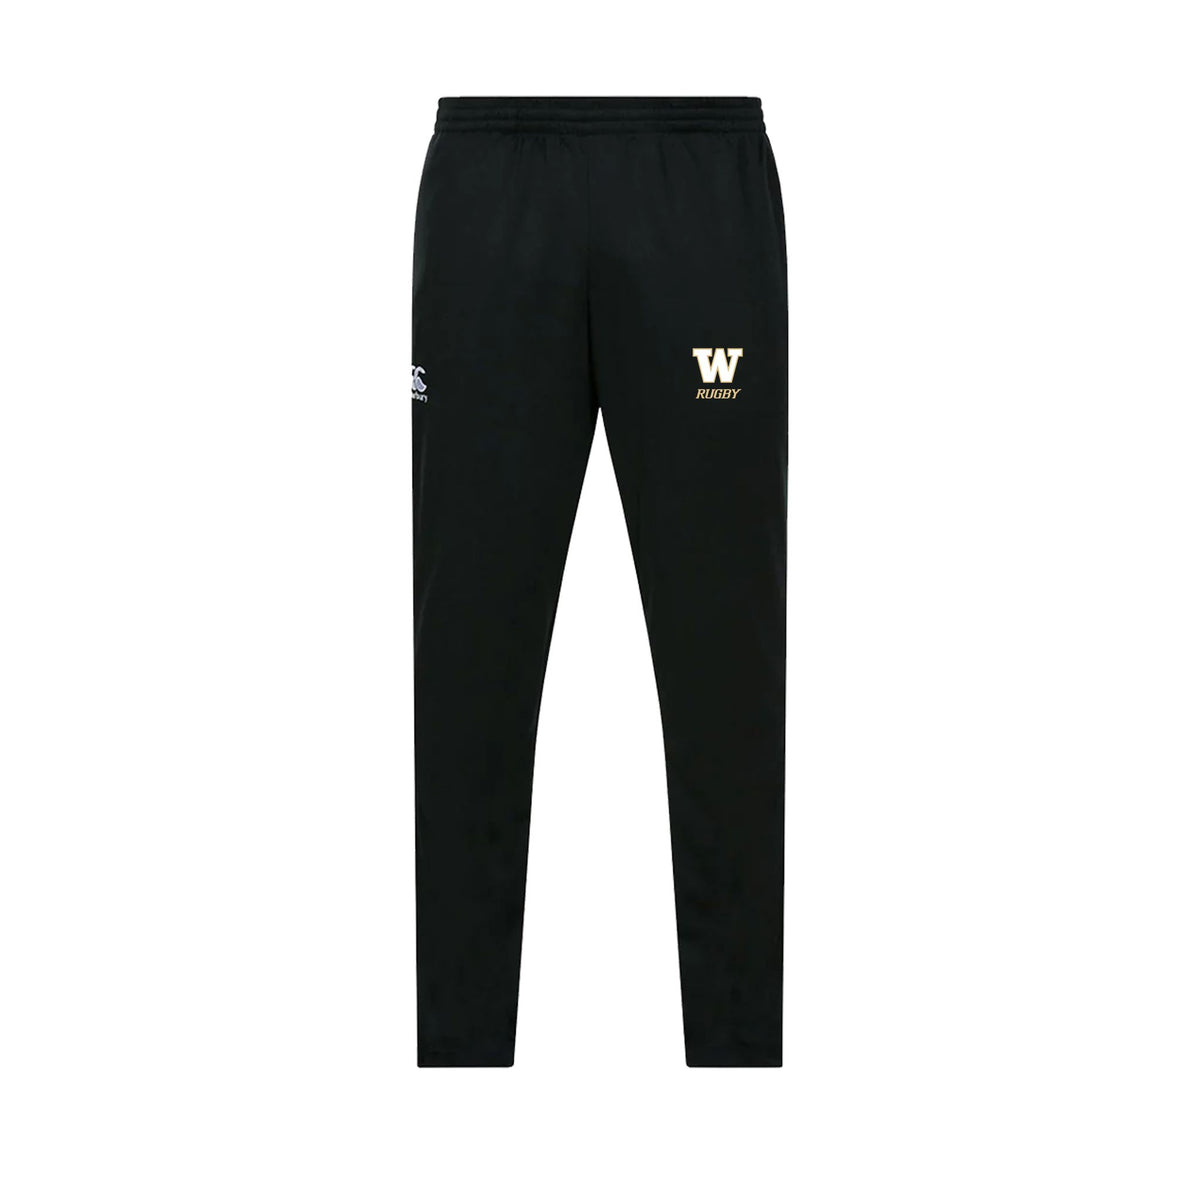 UW Women&#39;s Huskies Rugby Club Canterbury Stretch Tapered Pants-Black - The Rugby Shop The Rugby Shop UNISEX / Navy / XS TRS Distribution Canada Track Pants UW Women&#39;s Huskies Rugby Club Canterbury Stretch Tapered Pants-Black